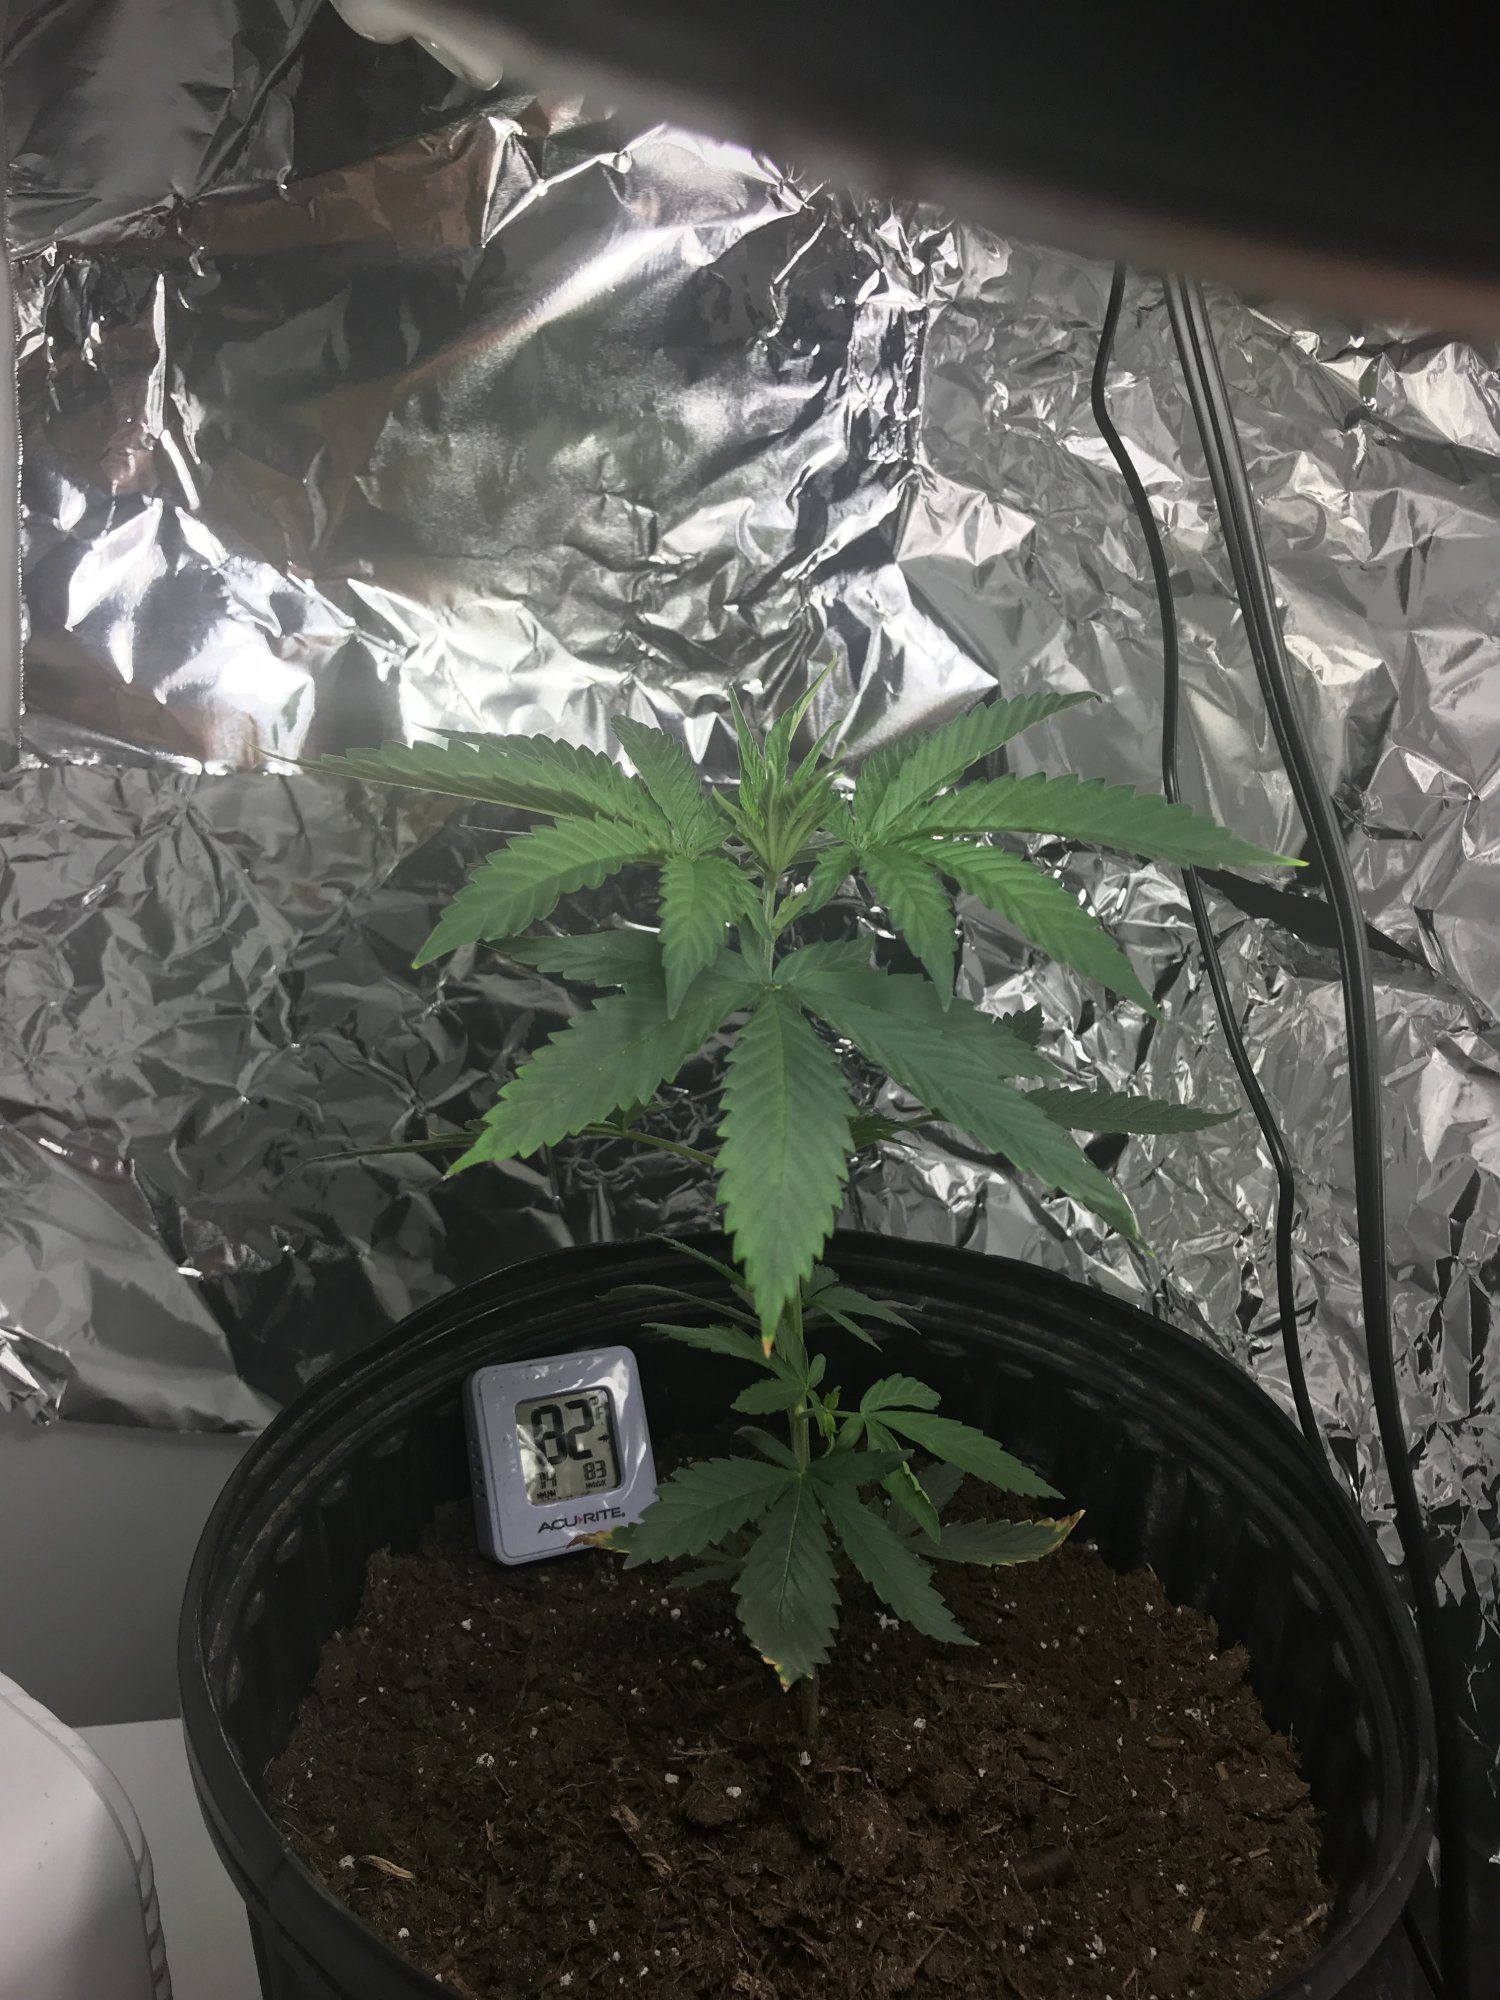 How should i train this plant 2